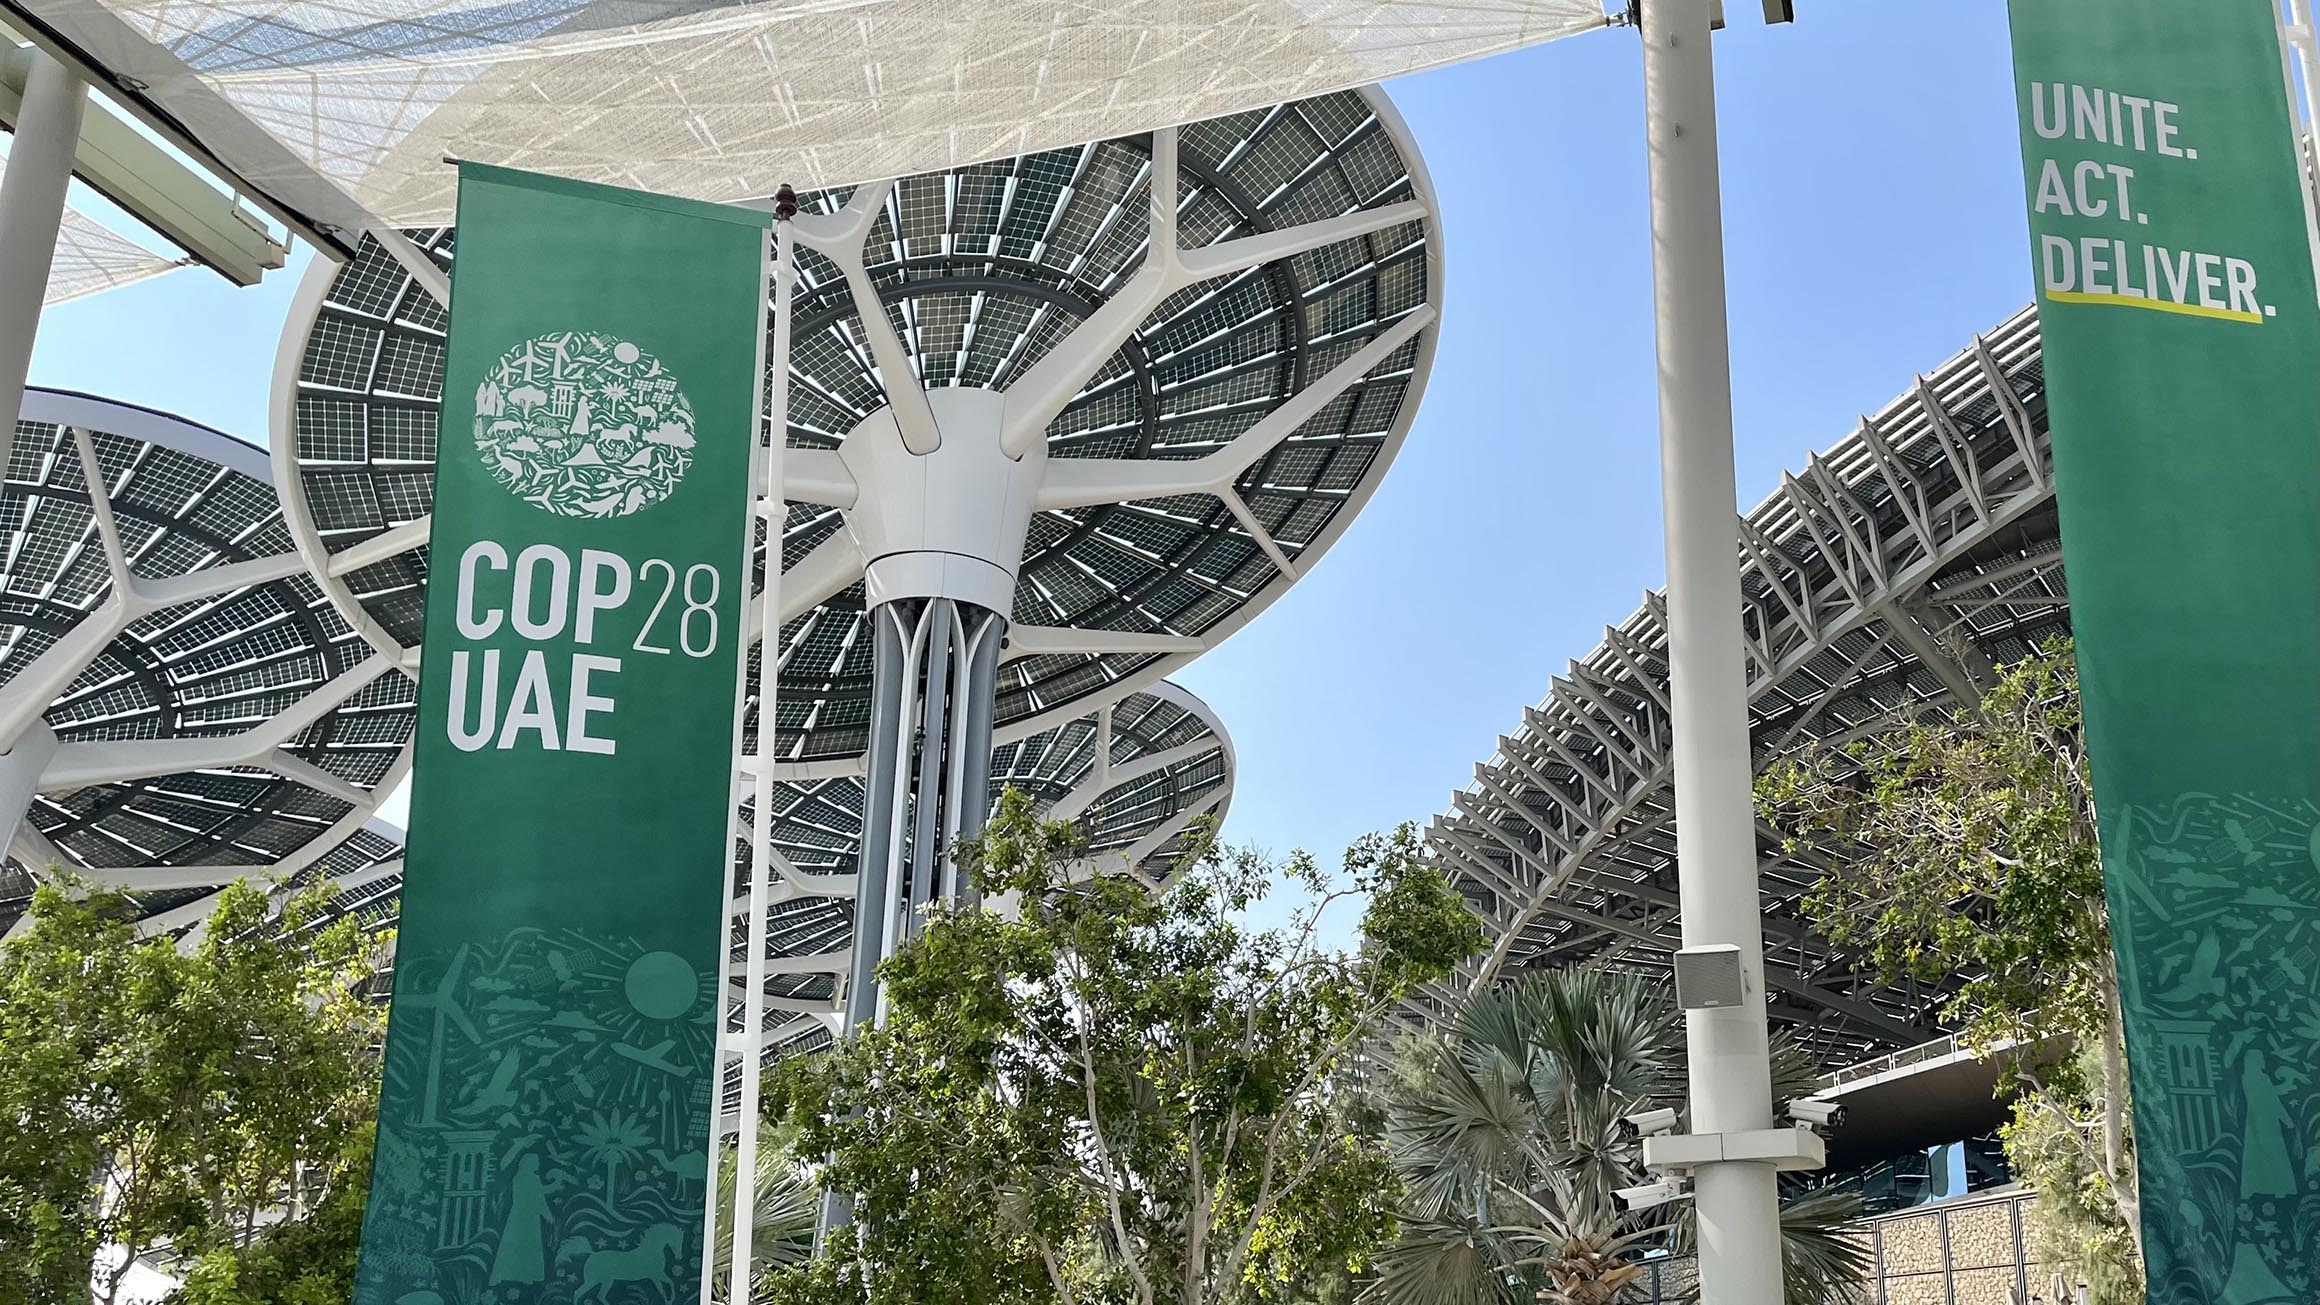 The name of COP28 is on a banner hanging from the entrance at the conference